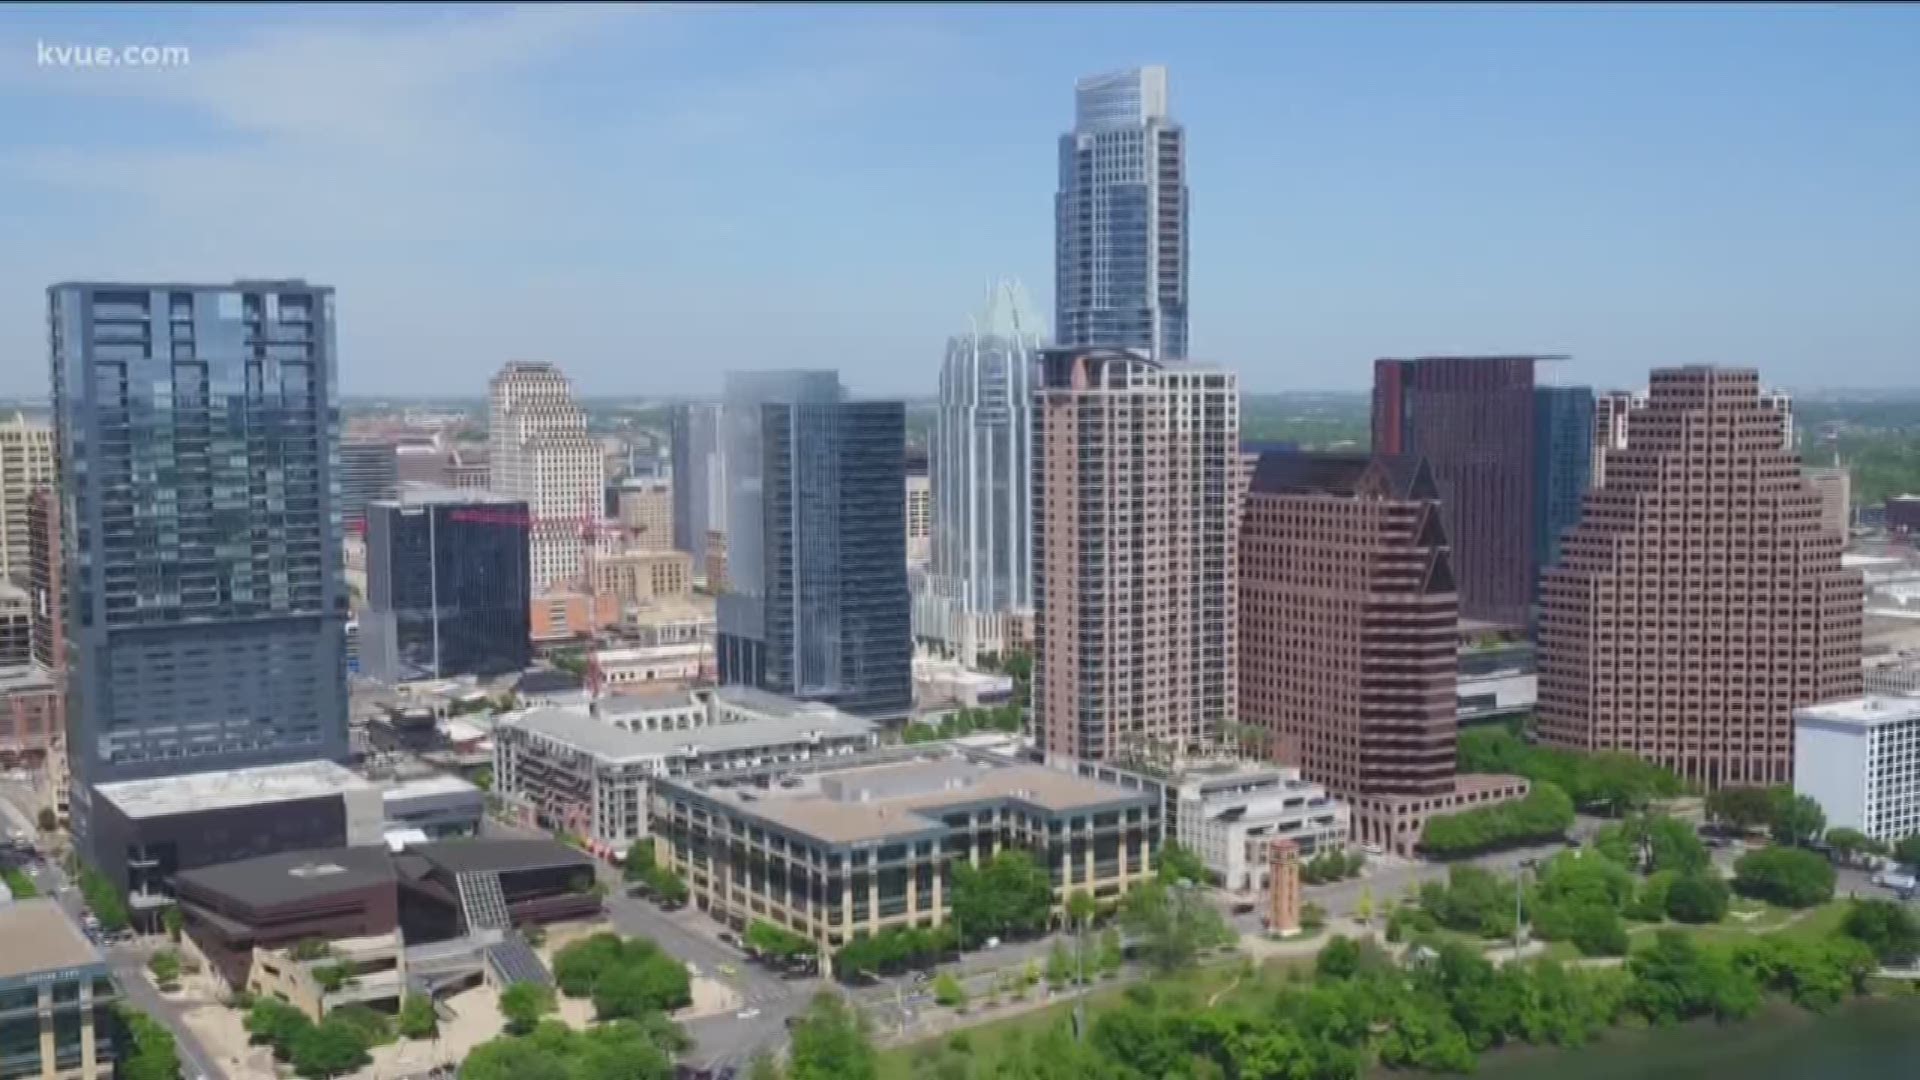 In 2040, Austin will be a lot more crowded, more like Houston than the Austin we know today.